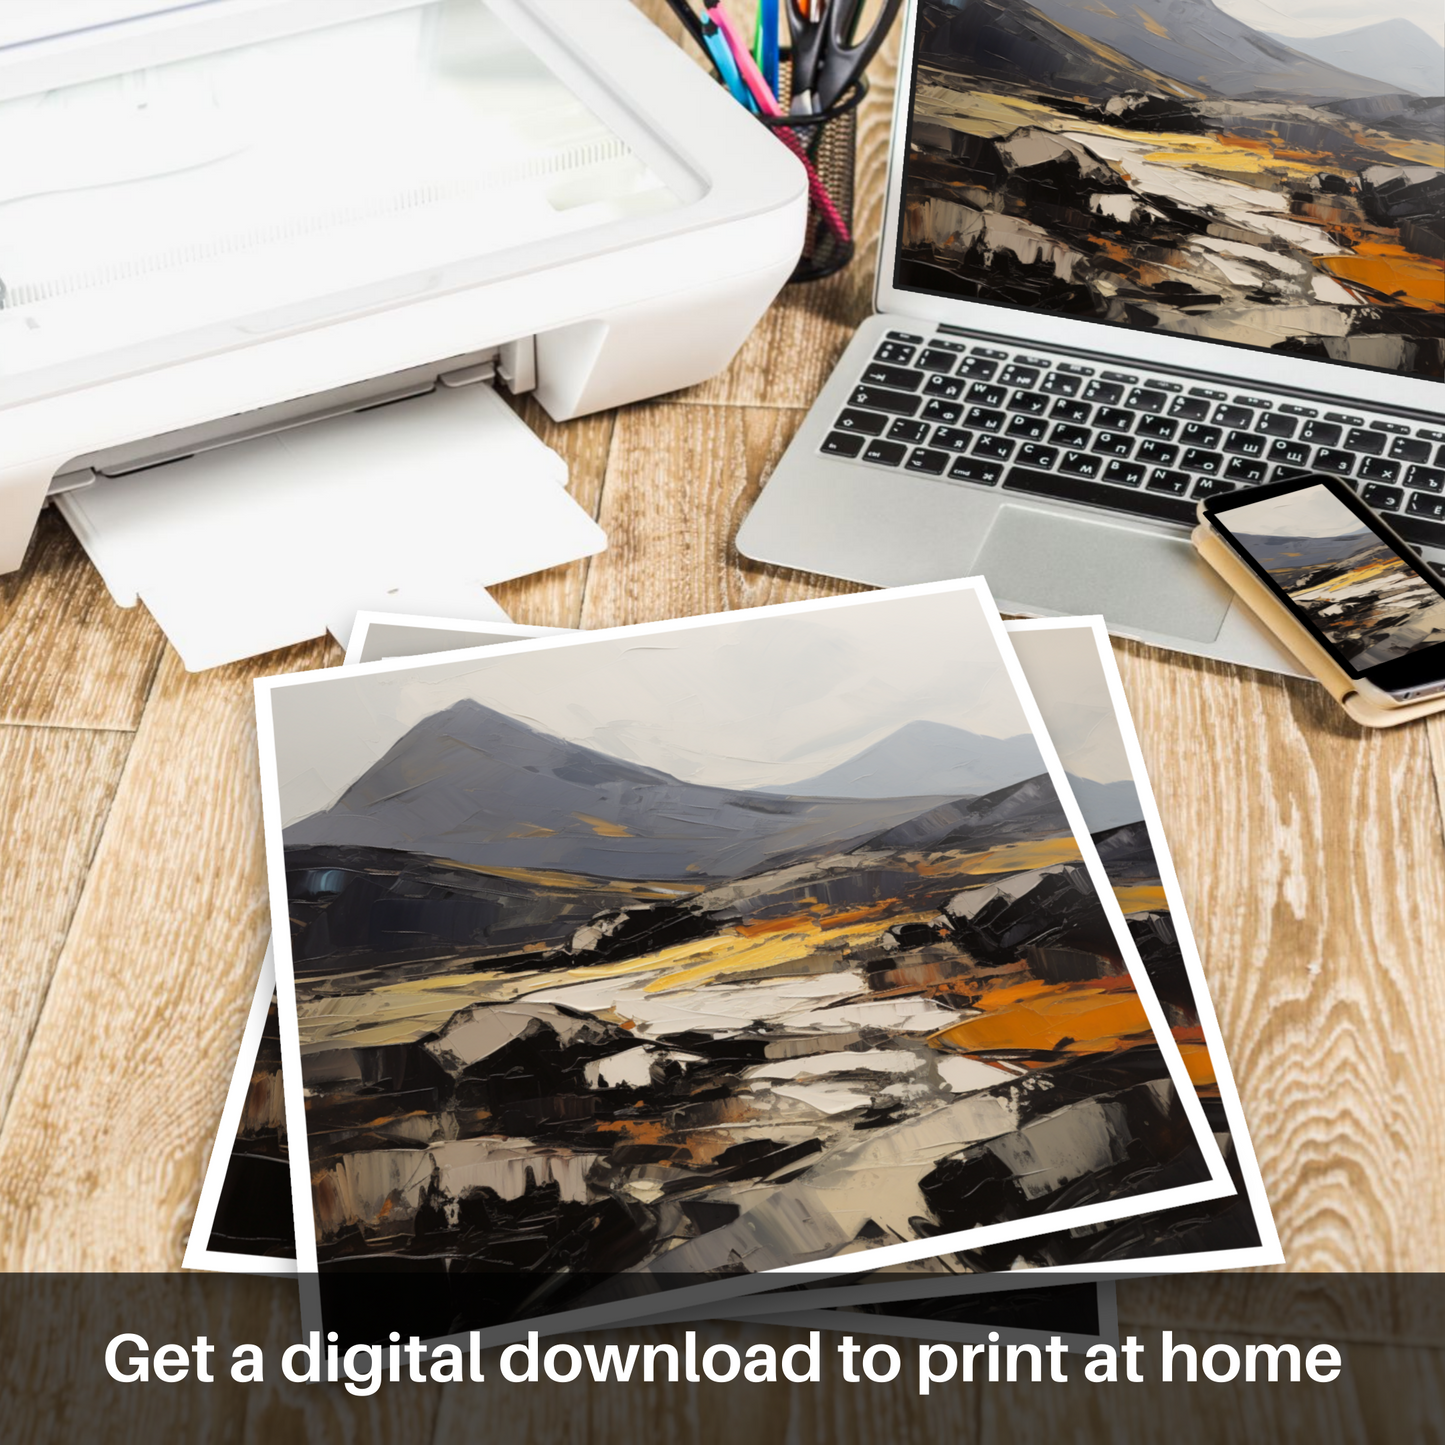 Downloadable and printable picture of Ben More, Isle of Mull